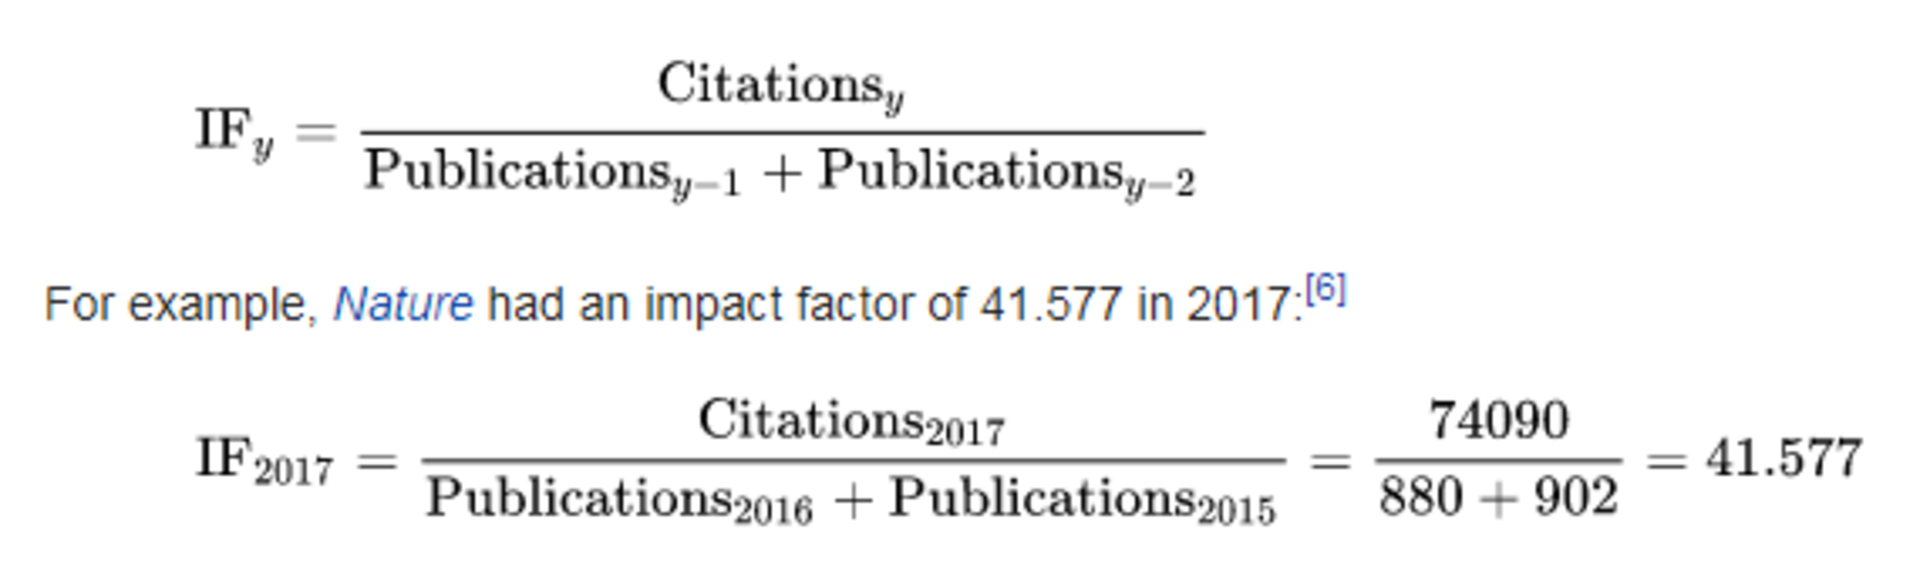 Image detailing the formula used to calculate an impact factor